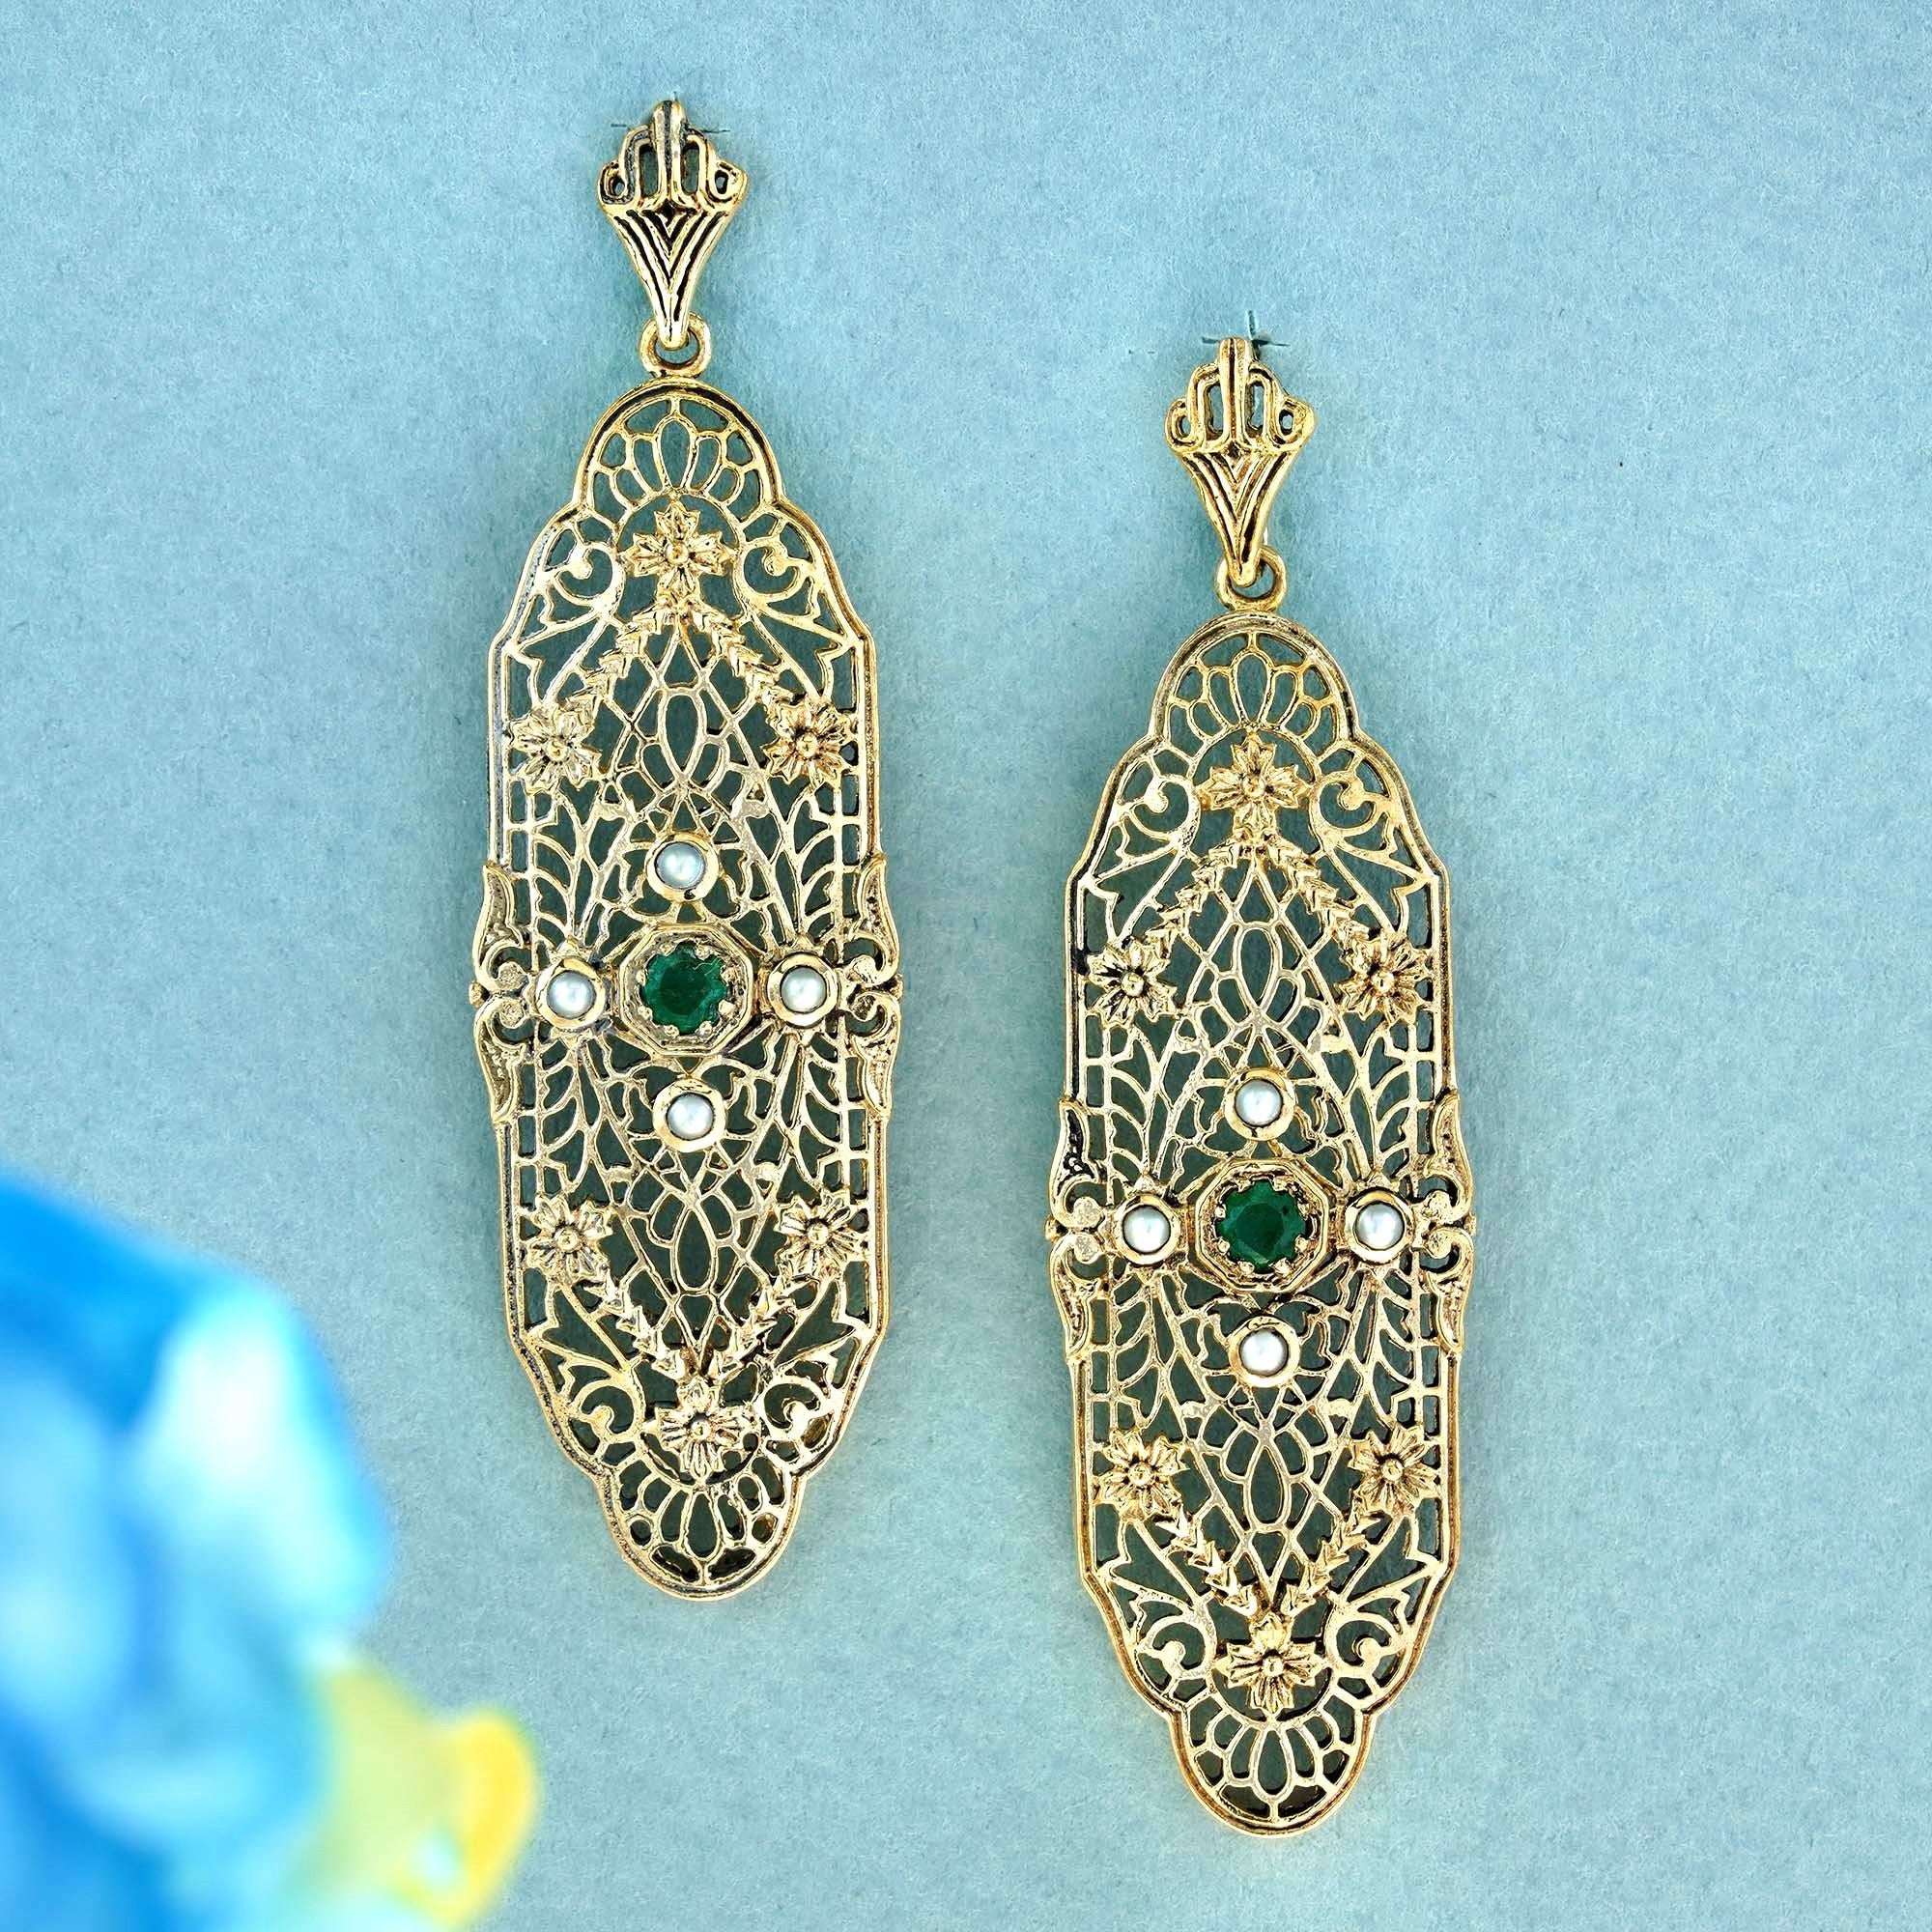 Indulge in the enchanting fusion of green, white, and gold as you revel in these captivating vintage-style filigree leaf-inspired earrings. The enduring allure of the green round emerald, accompanied by round white pearls in four directions within a